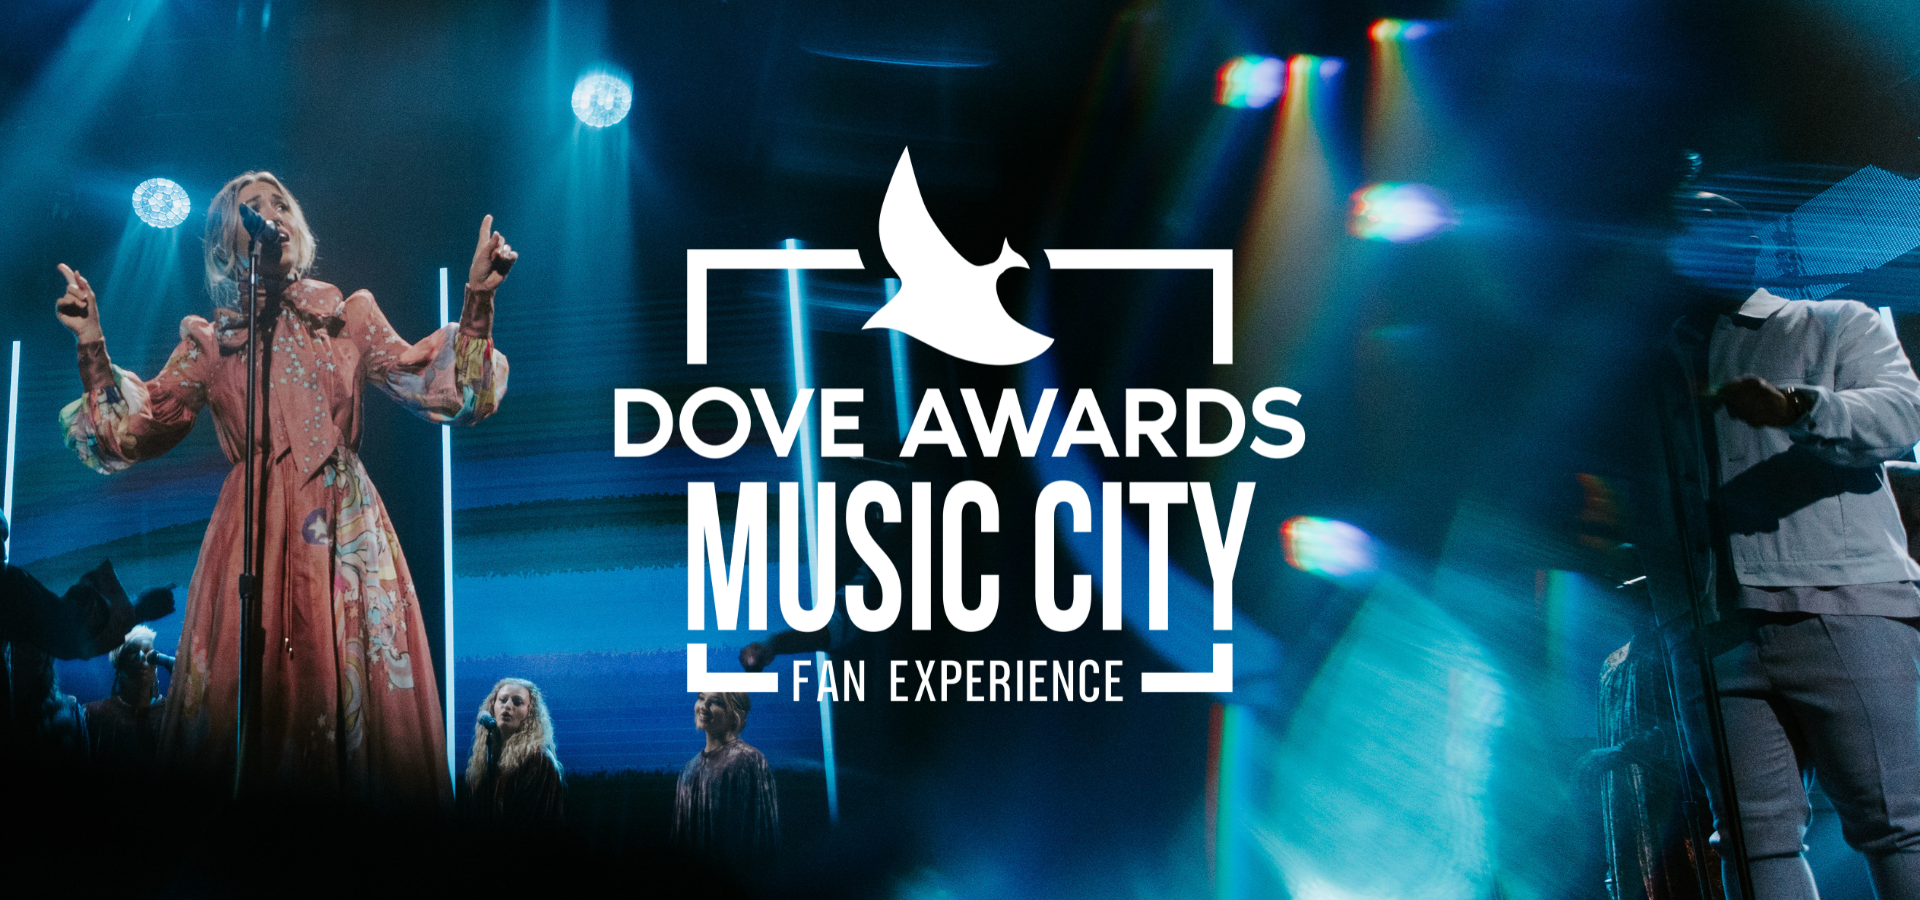 DON'T MISS IT: 20 Spots Left For The Dove Awards Music City Fan Experience